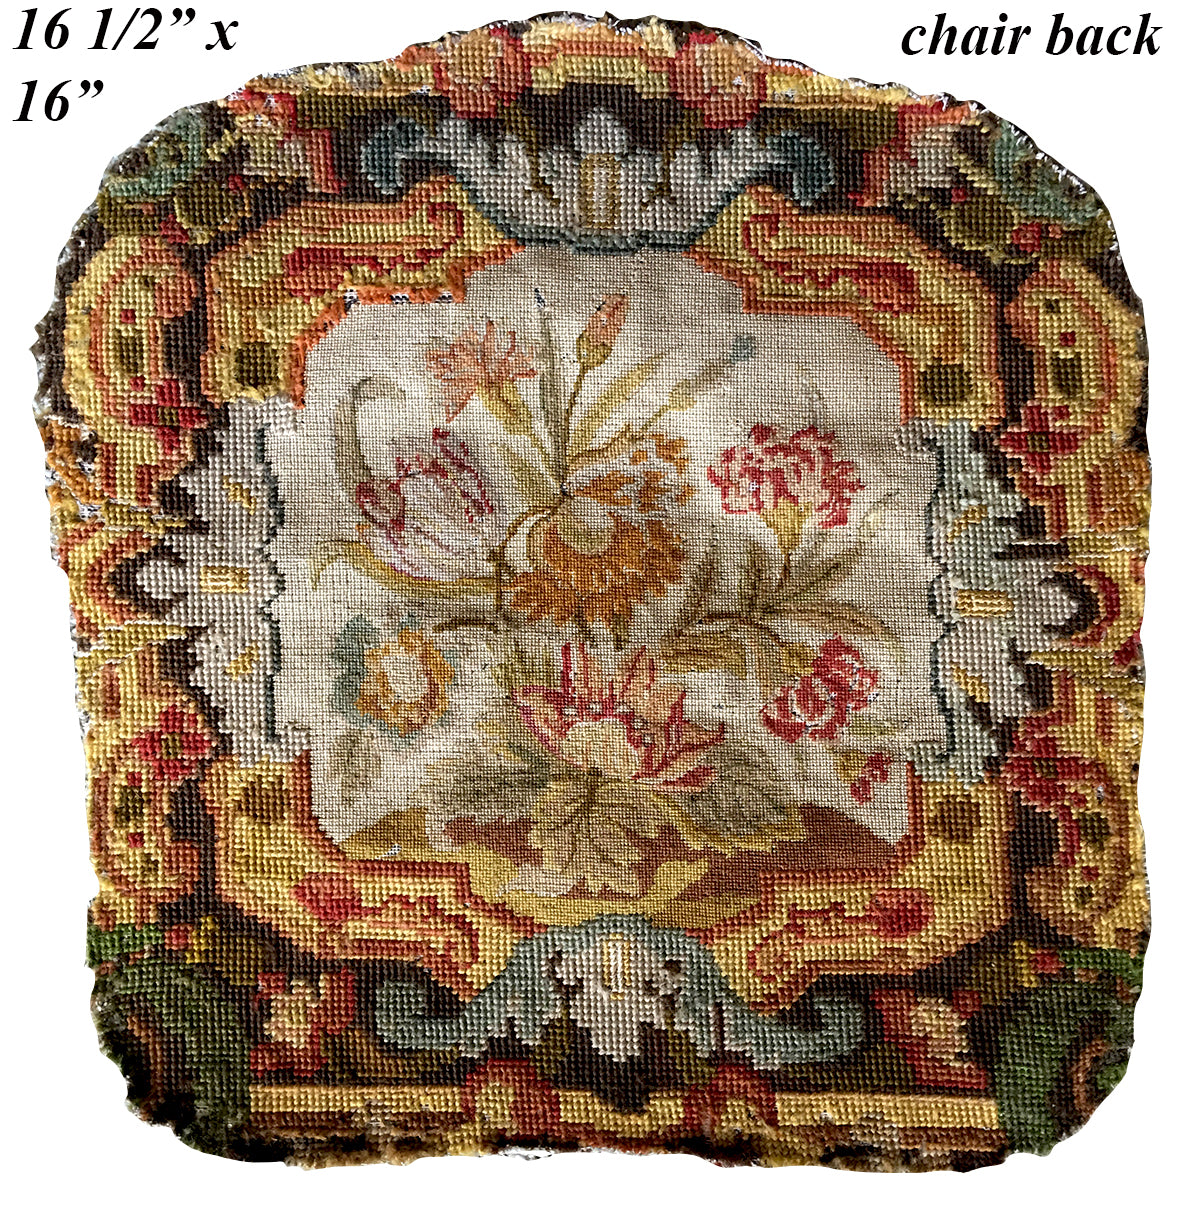 Superb Antique French 16.5" Needlepoint, Embroidery Chair Back to Make into Pillow Top